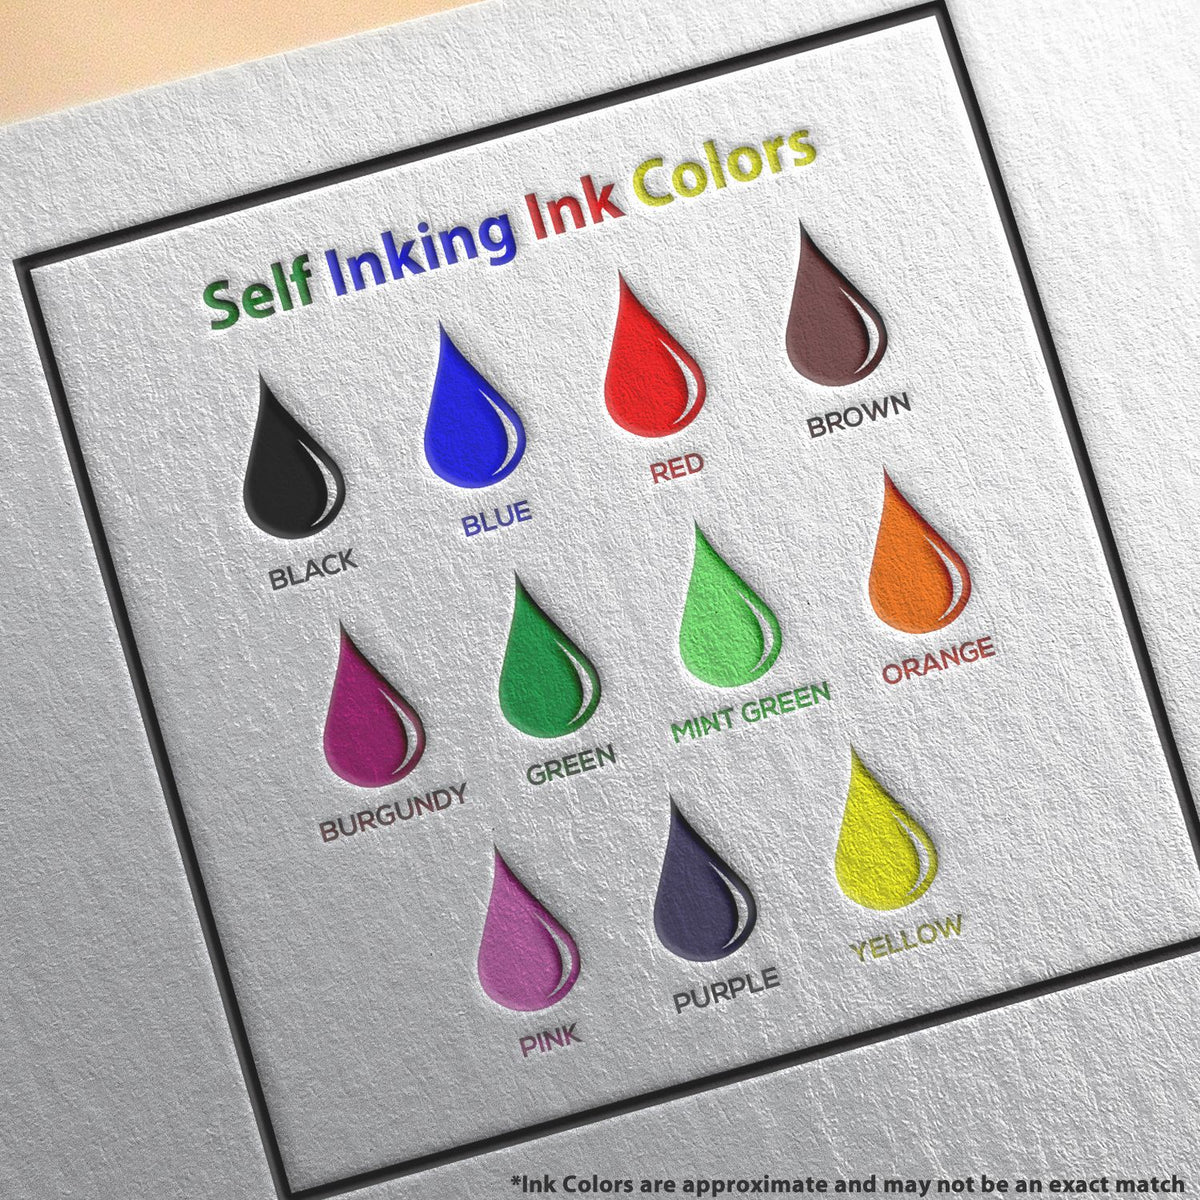 A picture showing the different ink colors or hues available for the Self-Inking South Carolina PE Stamp product.